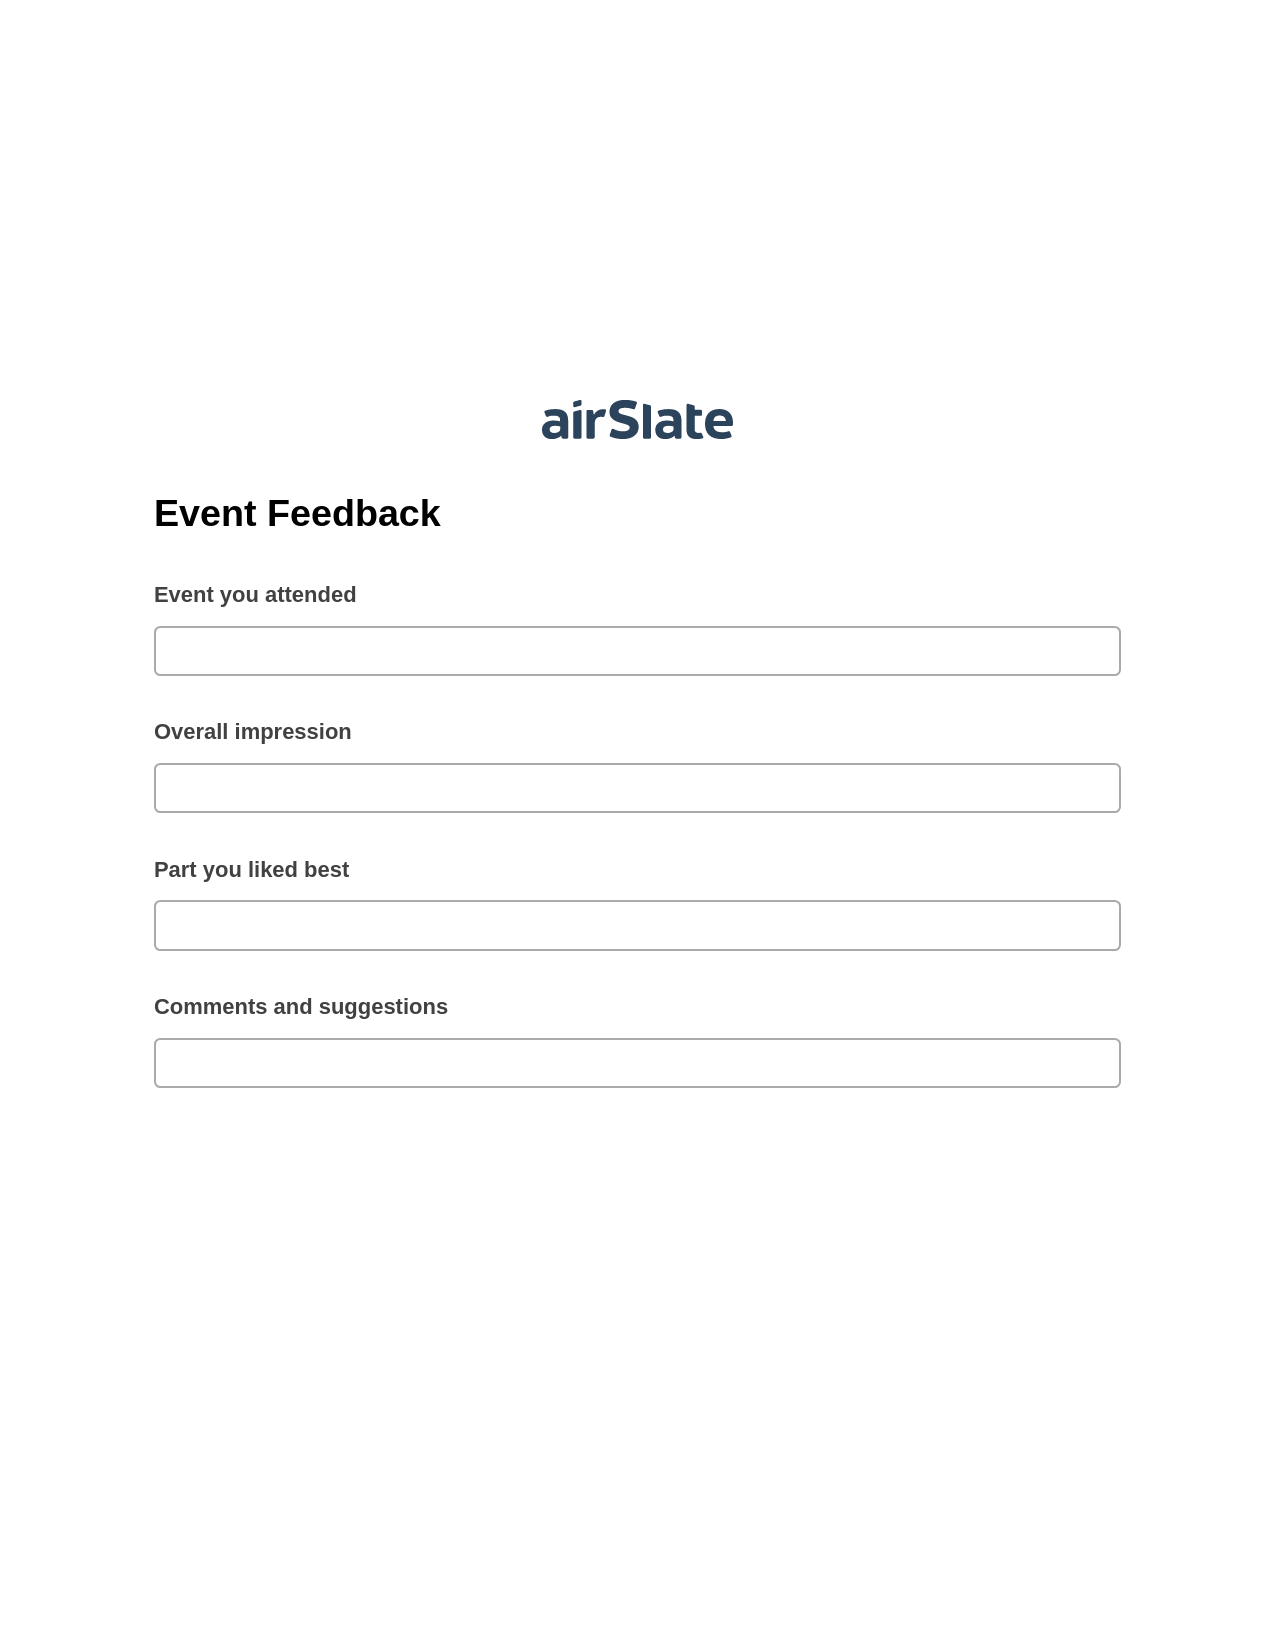 Event Feedback Pre-fill from Salesforce Record Bot, Pre-fill with Custom Data Bot, Export to Smartsheet